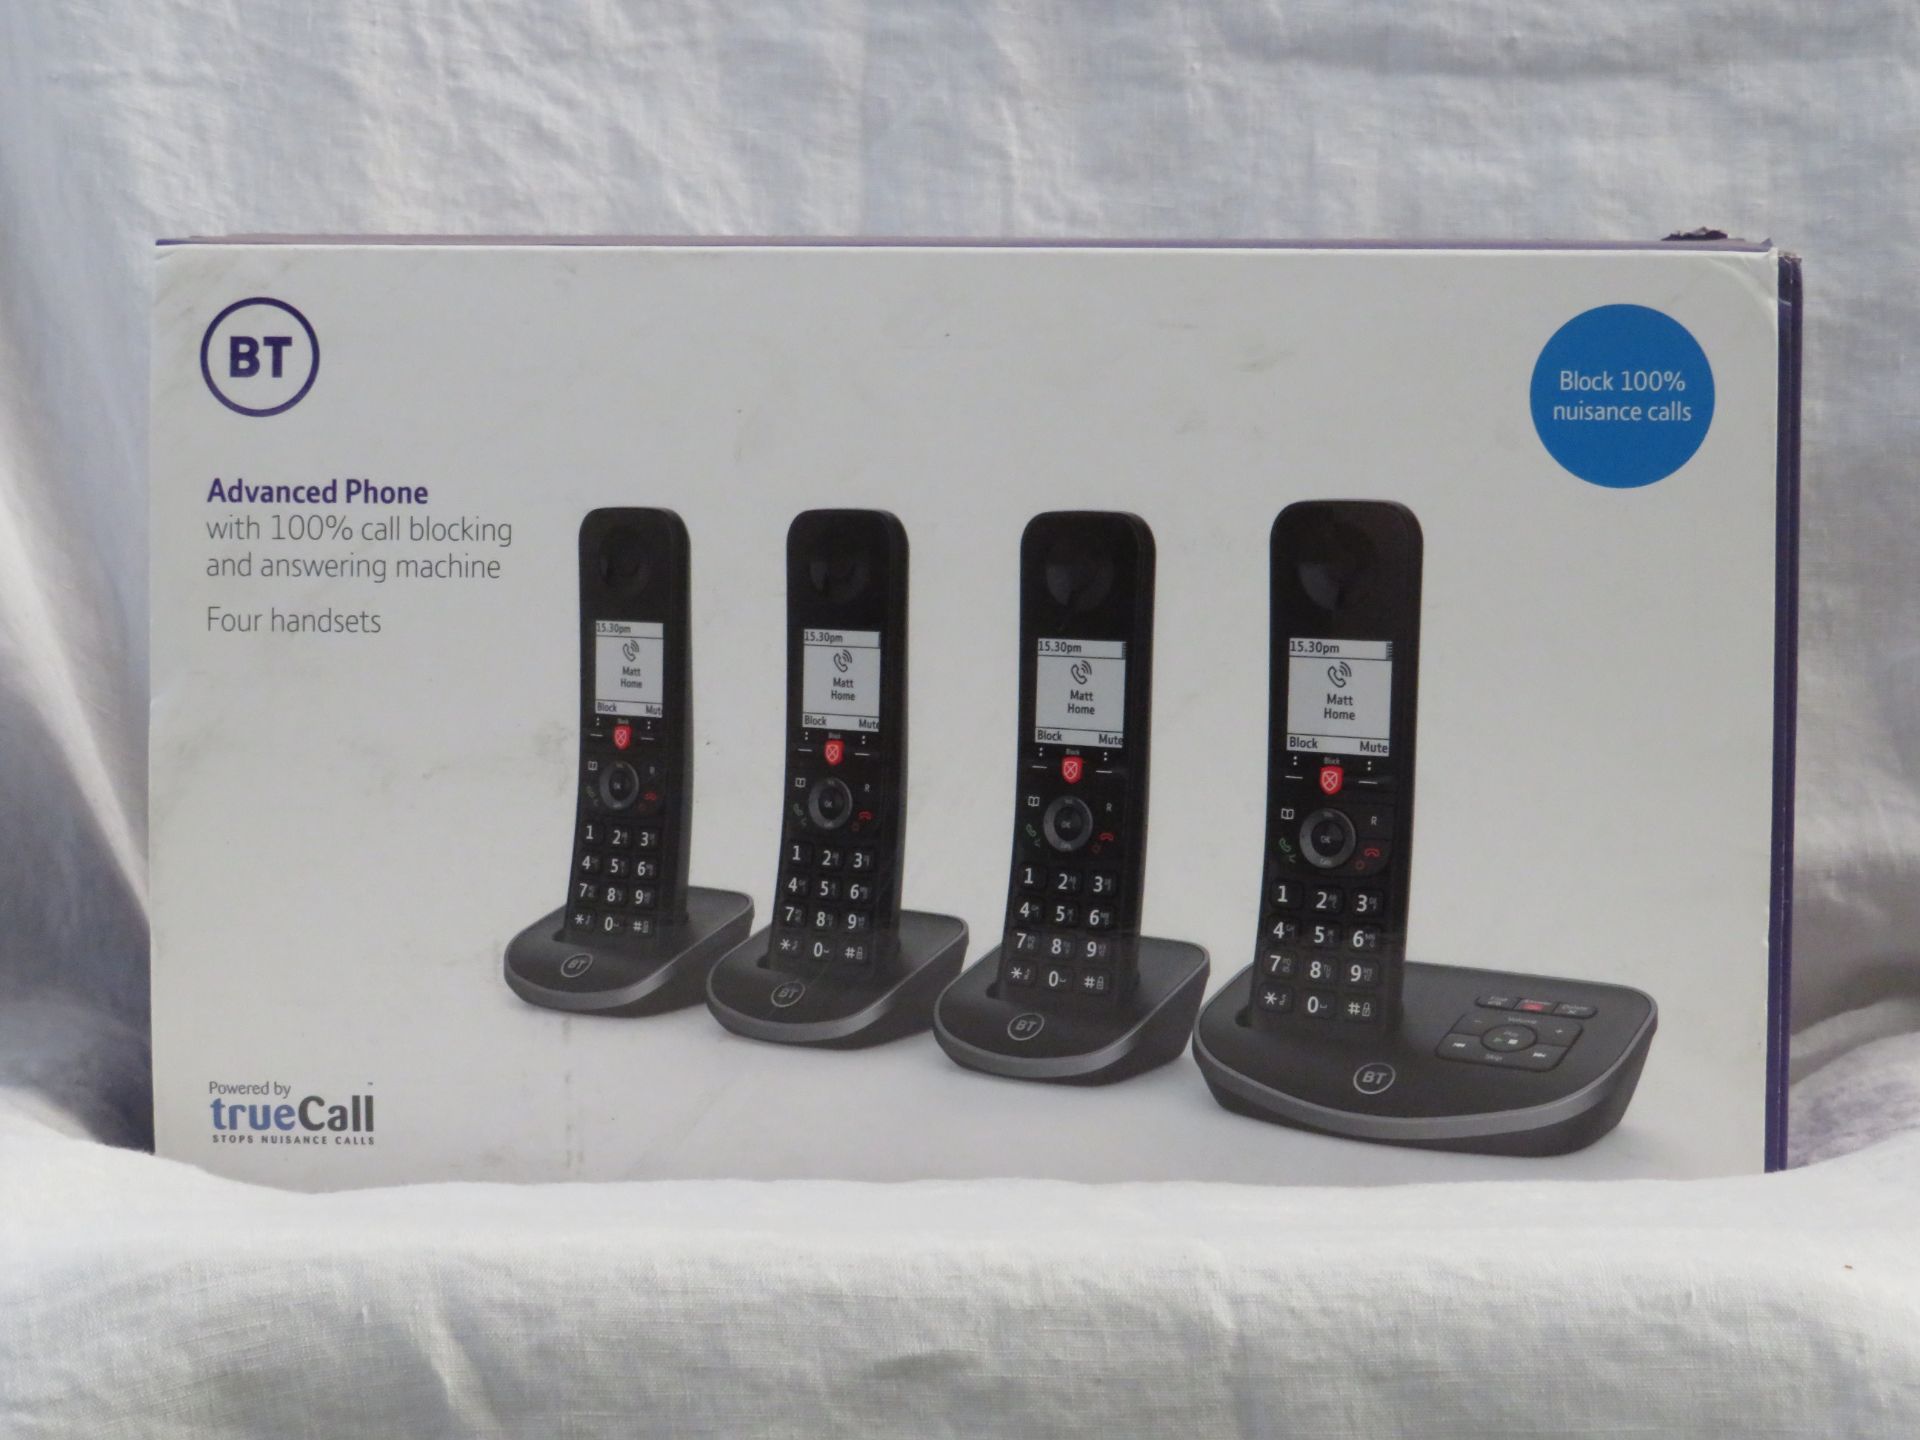 BT advanced phone with 100% call blocking and answering machine, four handsets, untested and boxed.